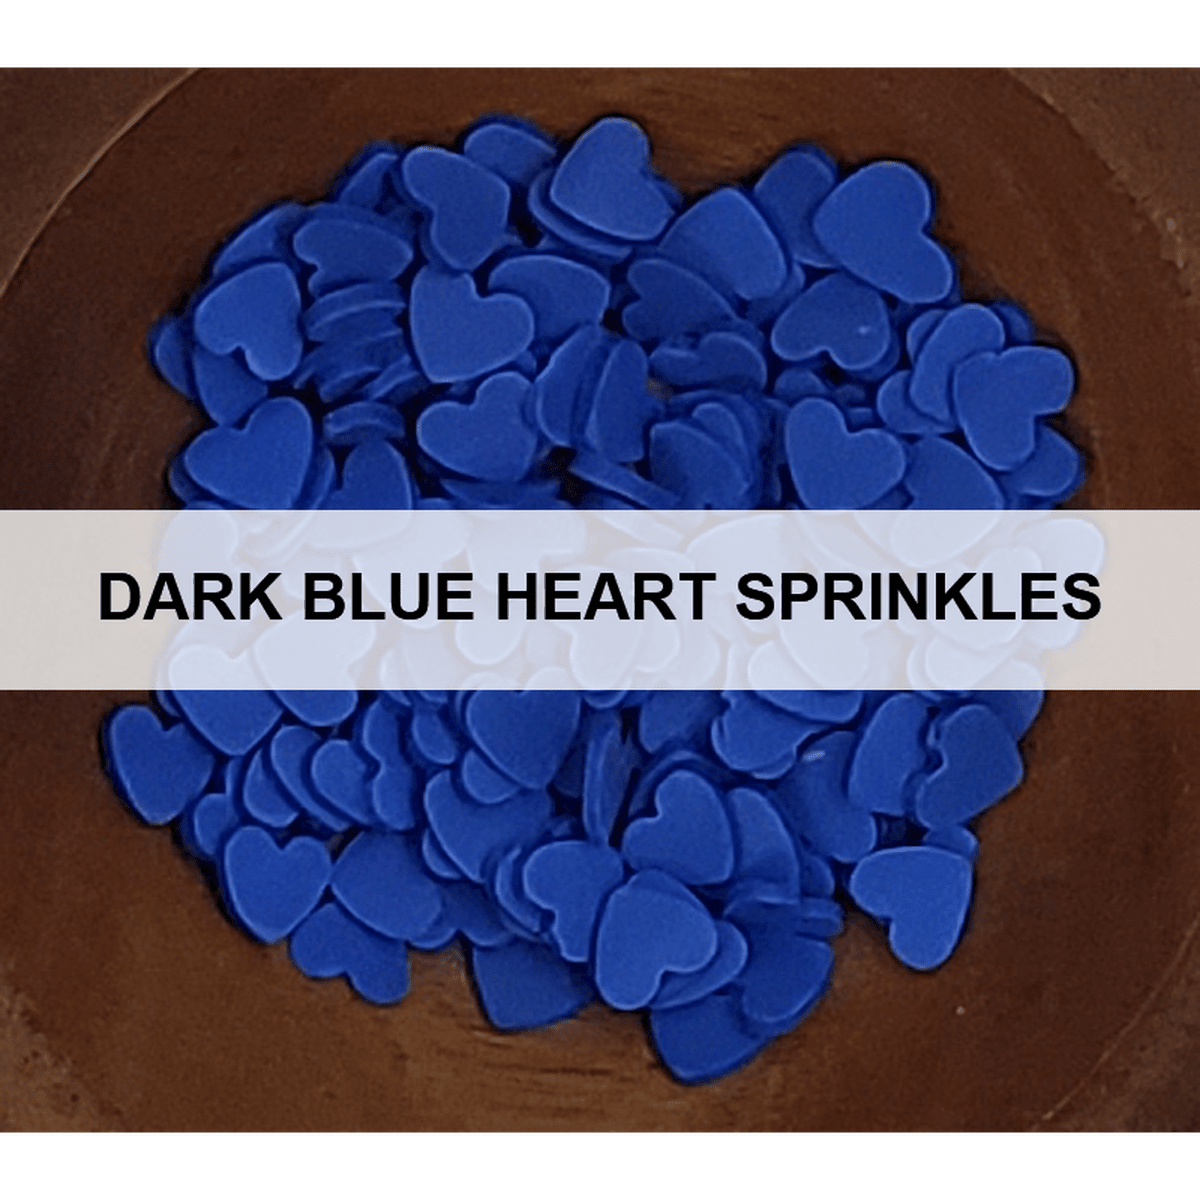 Dark Blue Heart Sprinkles by Kat Scrappiness - Kat Scrappiness